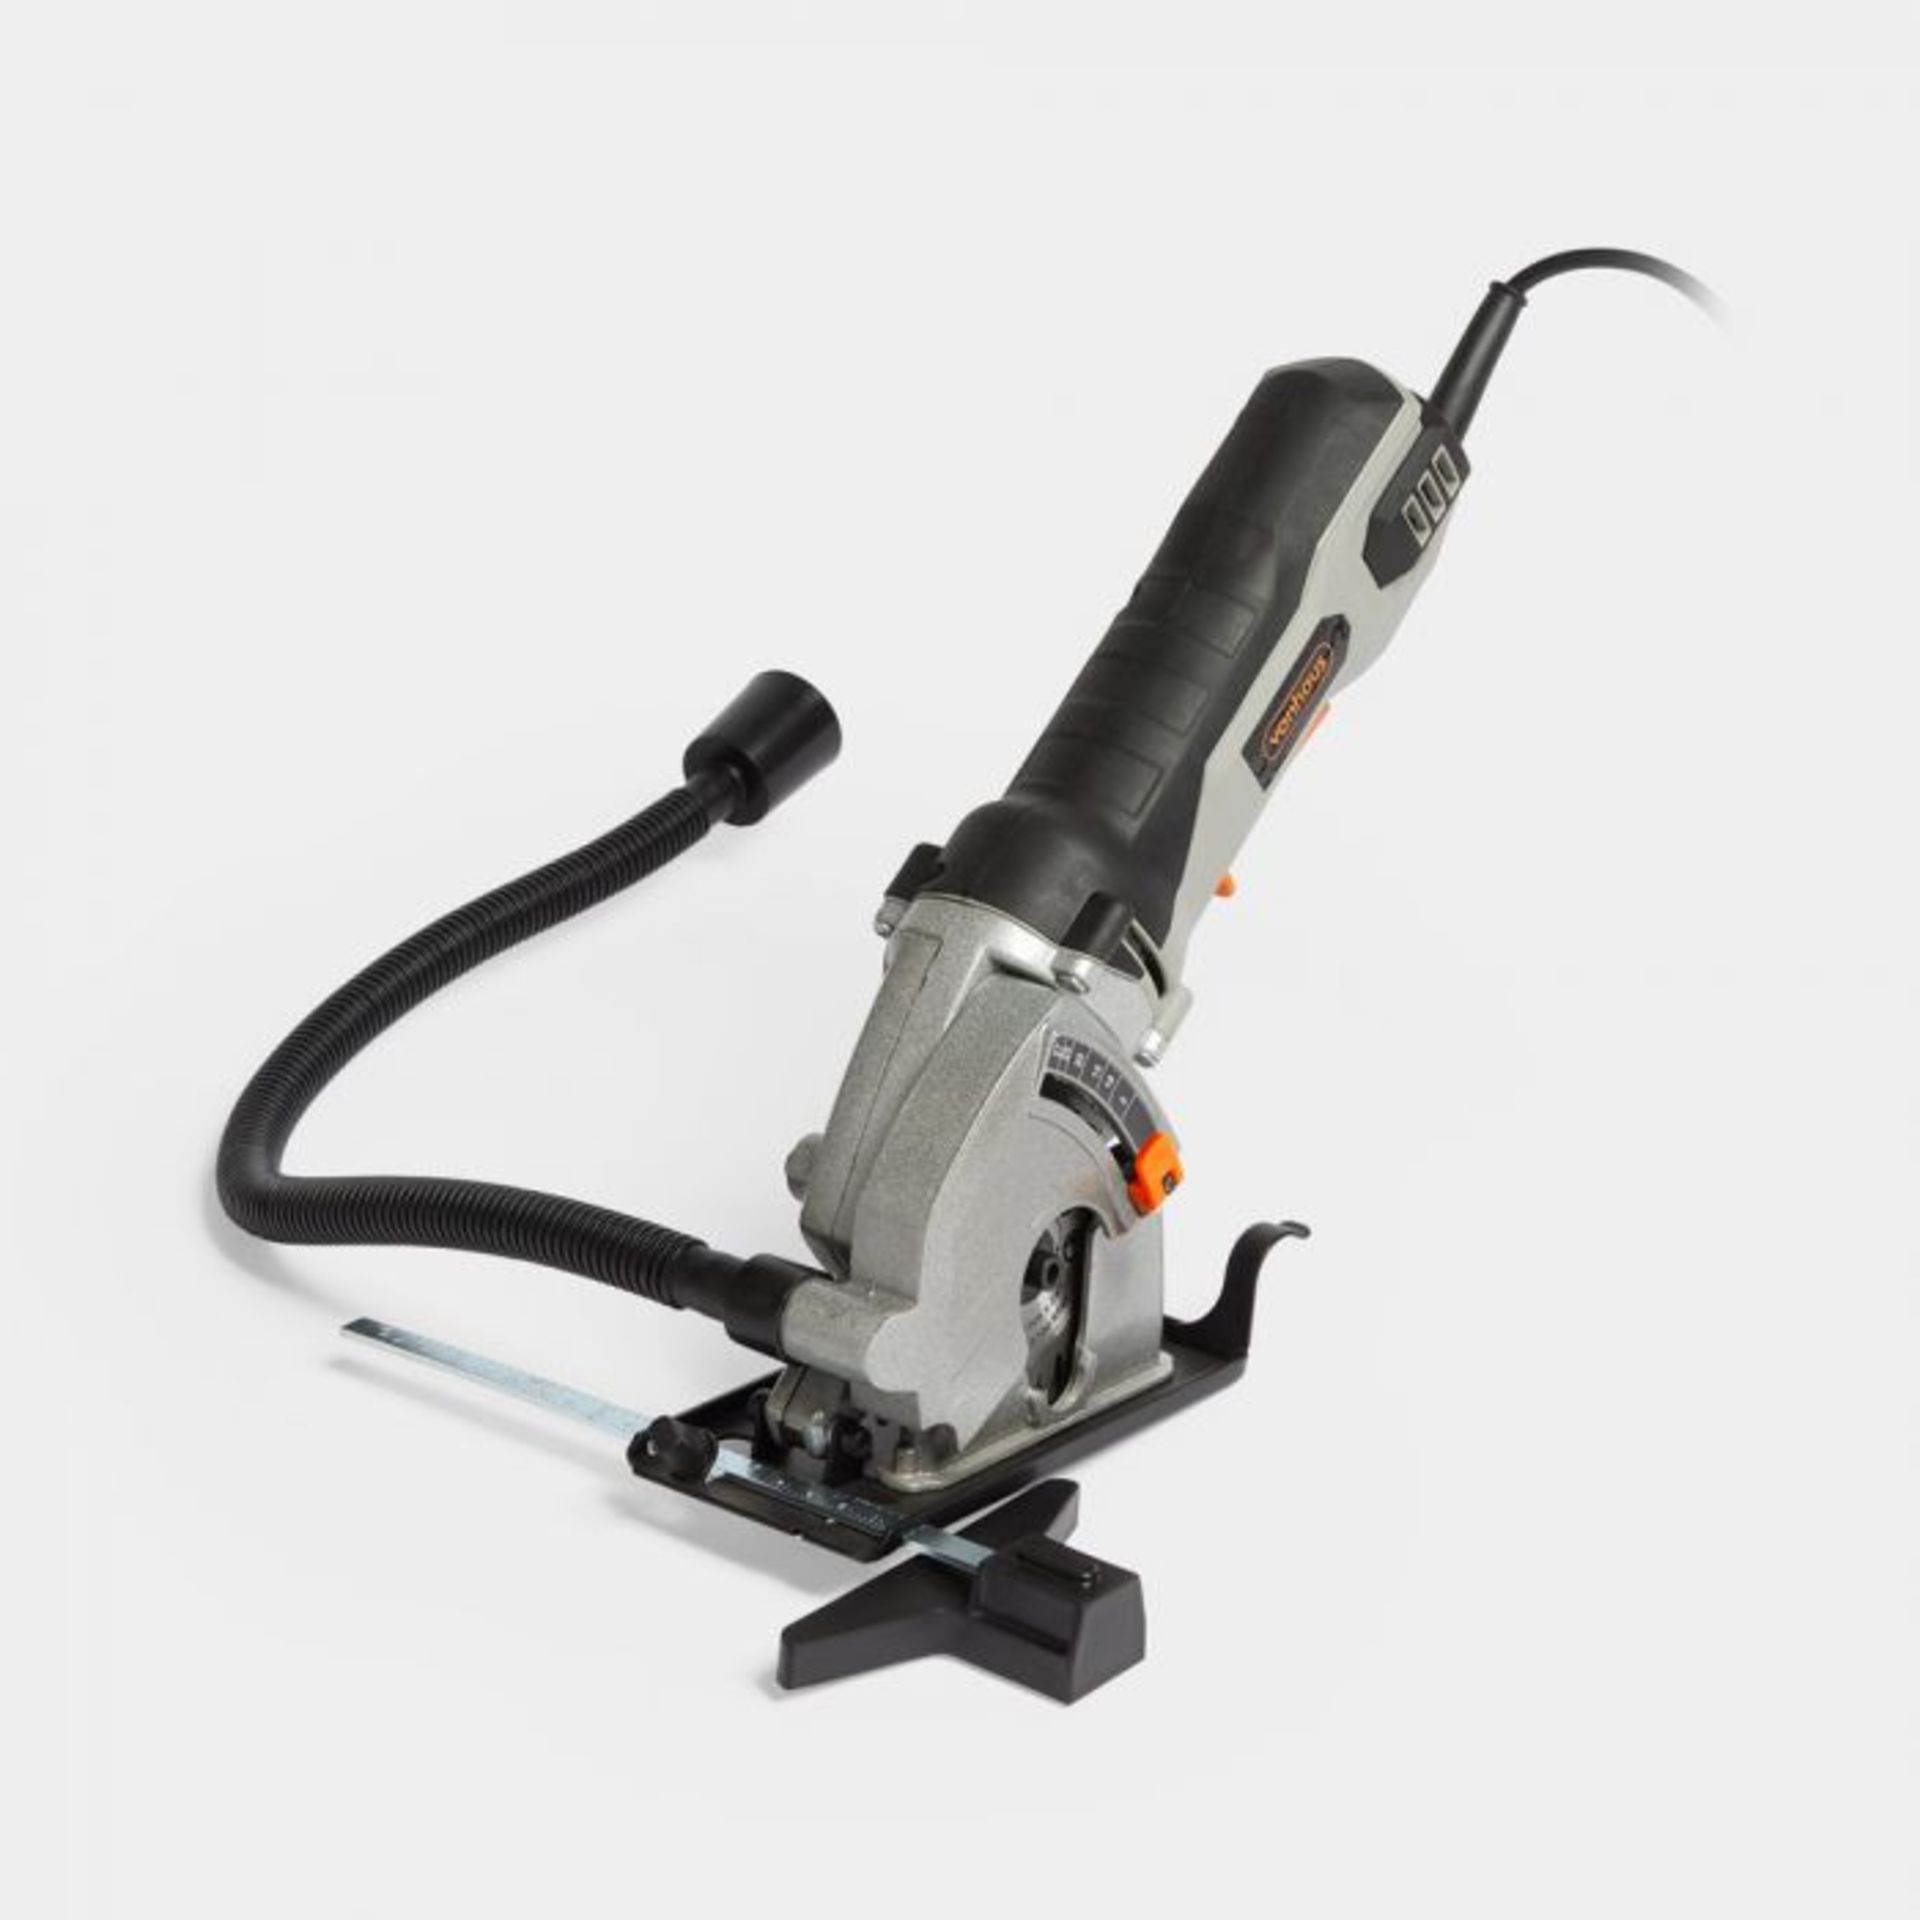 550W Mini Saw. Constructed with high-quality aluminium and steel, our powerful 550W Mini Saw is